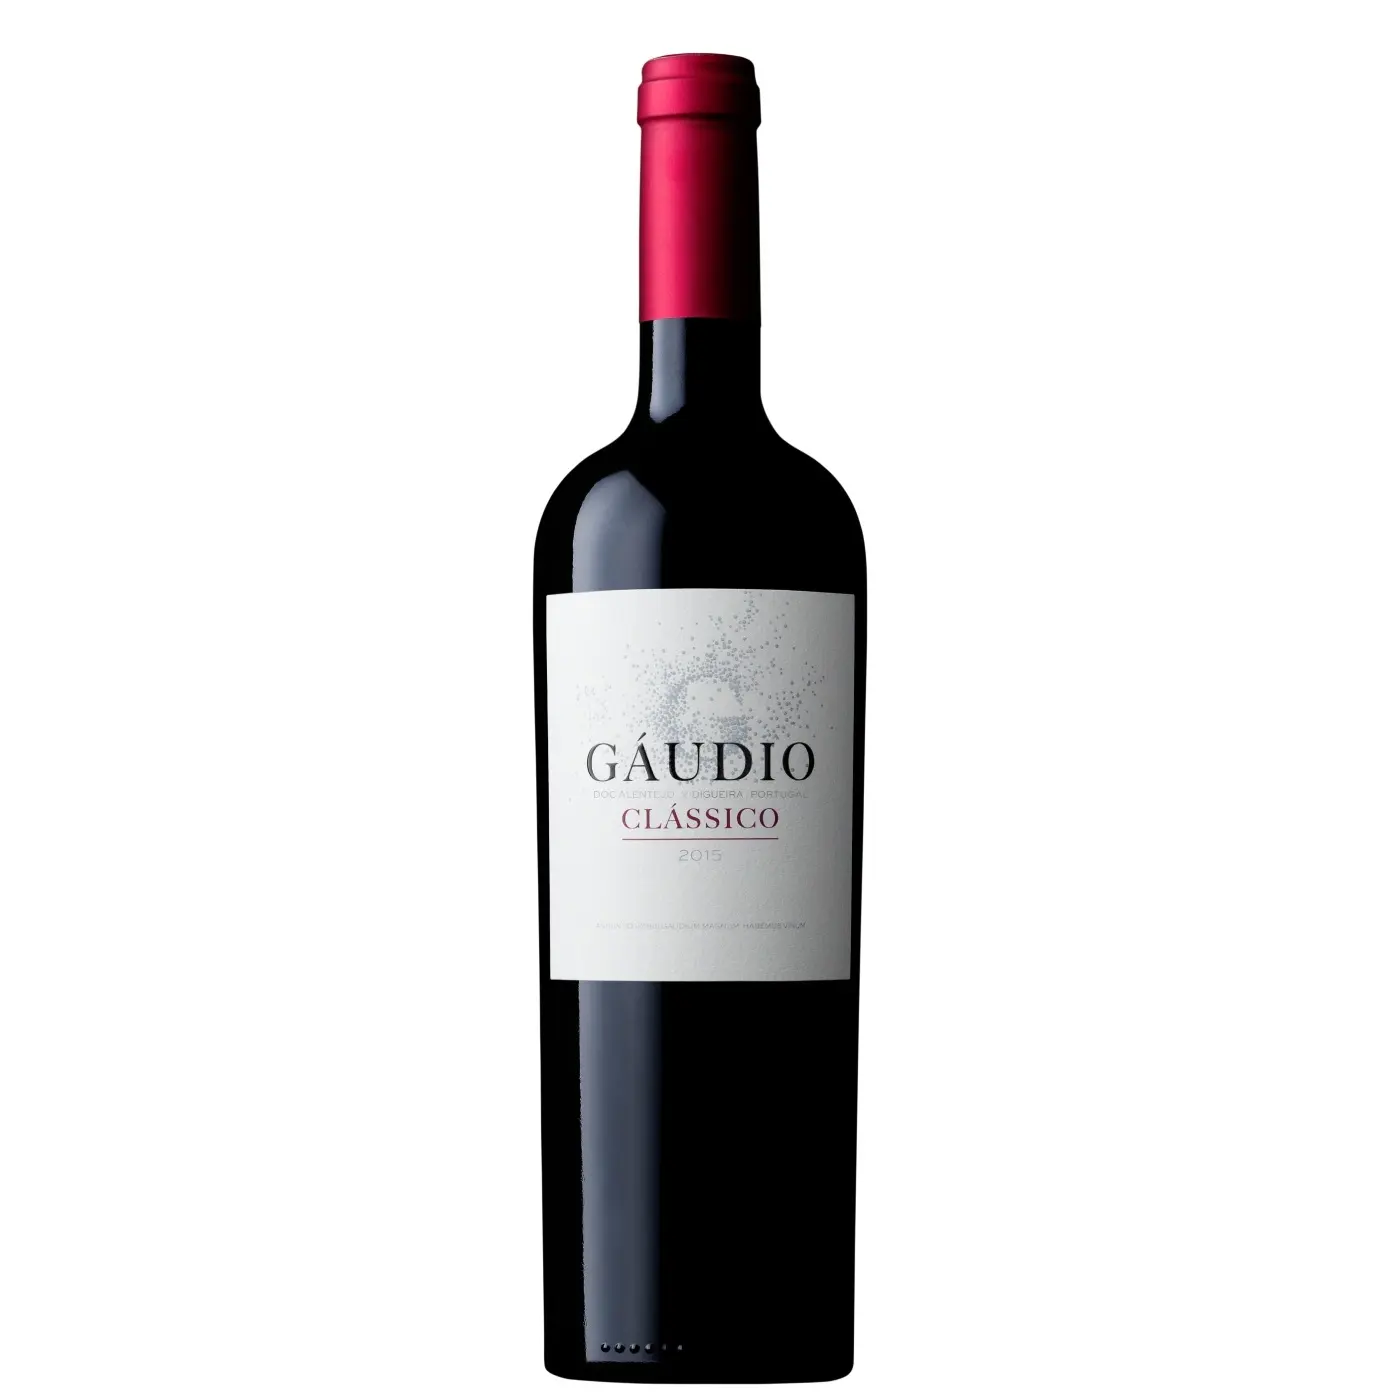 Gaudio Classico, richly structured red wine from Portugal aged in new French oak barrels, Gold medal, 91-point WE, DOC Alentejo